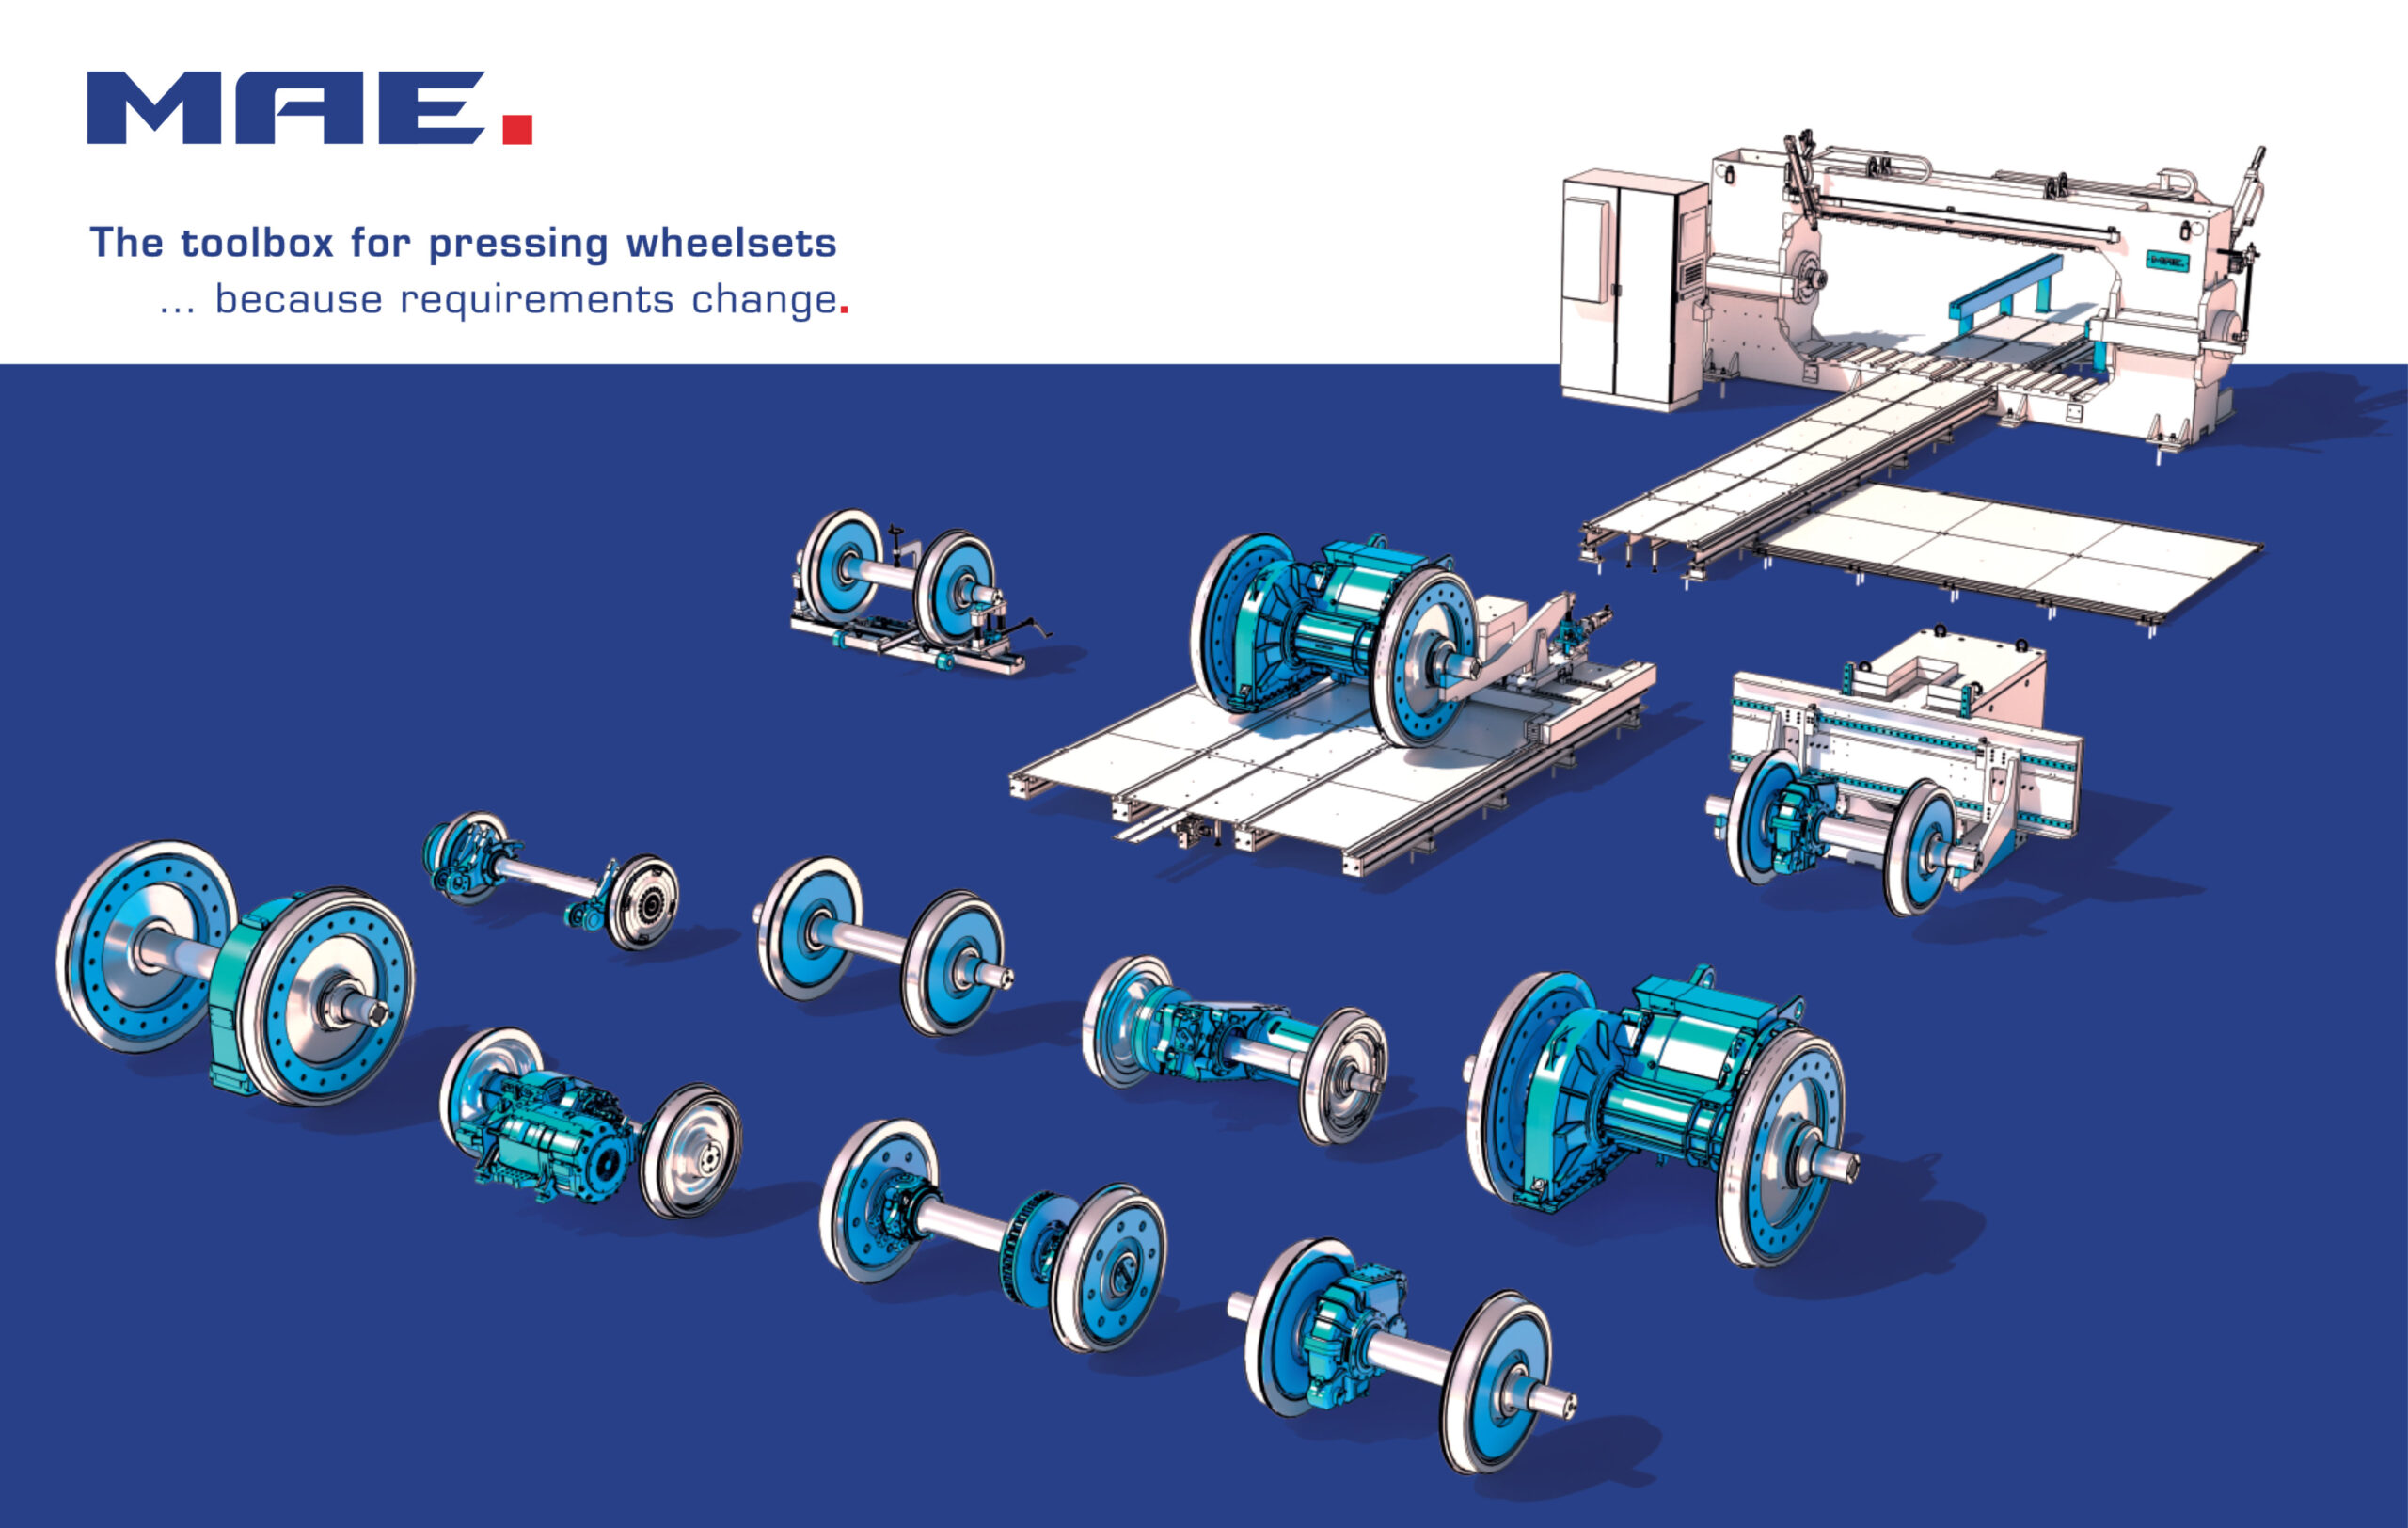 Illustration of wheelset press extensions to meet requirements of different wheelset types